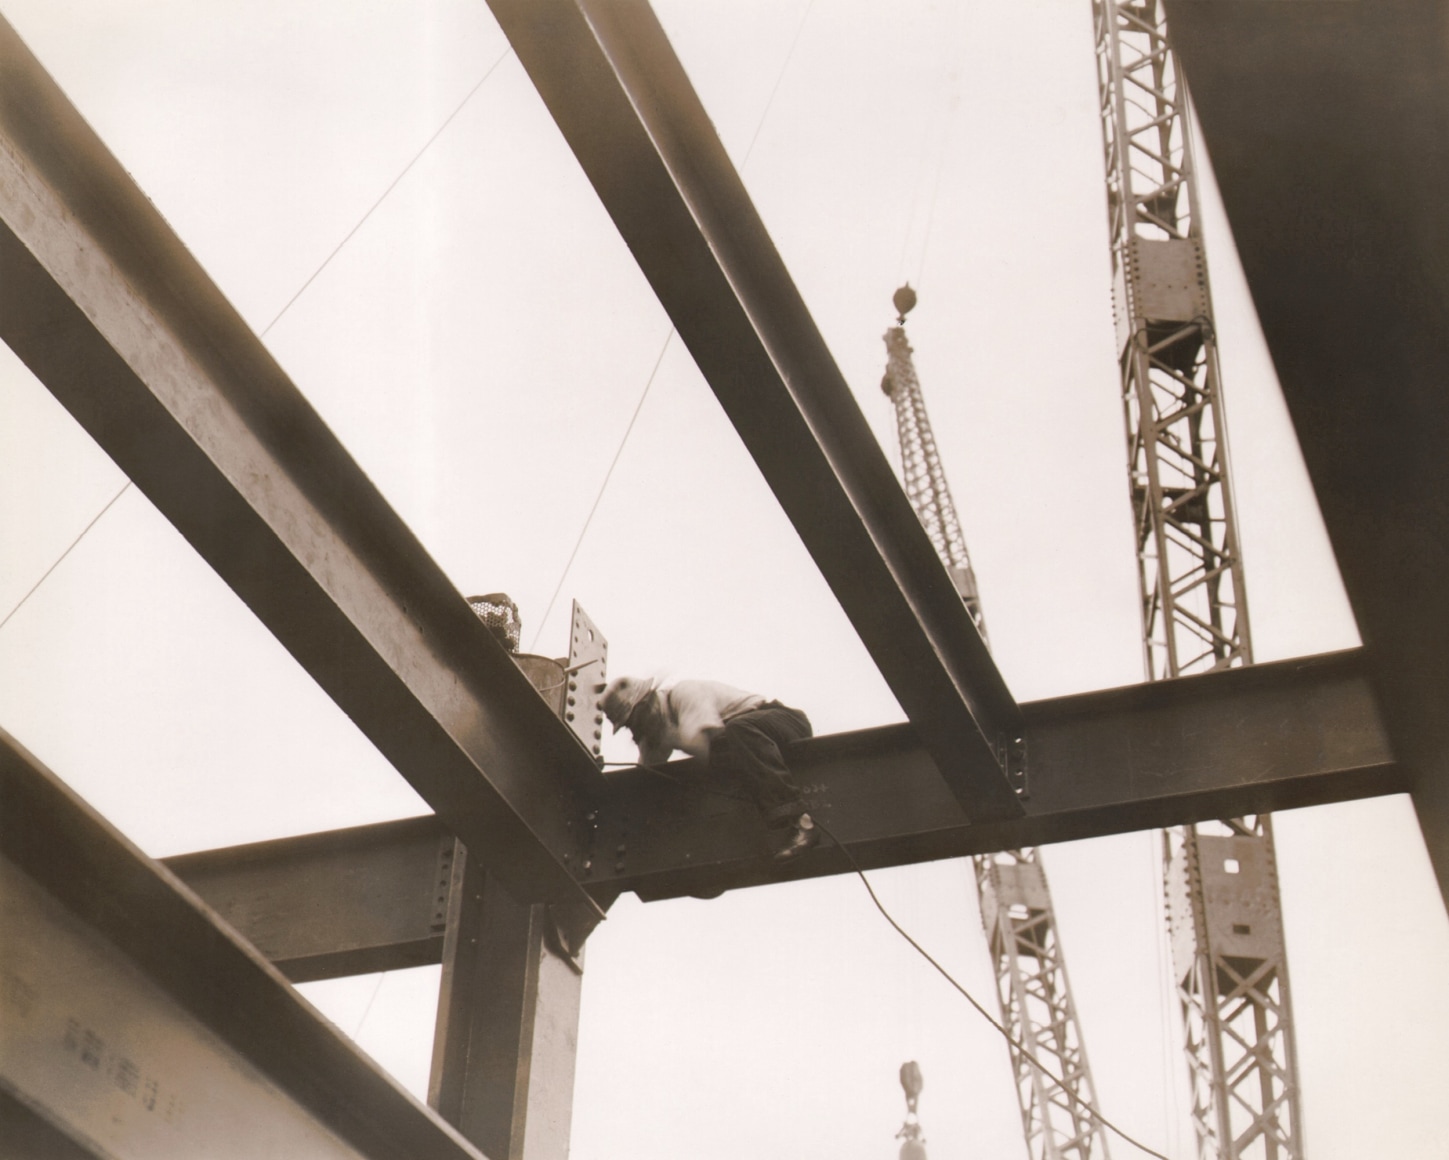 Paul J. Woolf, Rockefeller Center Construction, ​c. 1933. Detail of structural metal supports and a construction worker seated on one of the horizontal pieces.